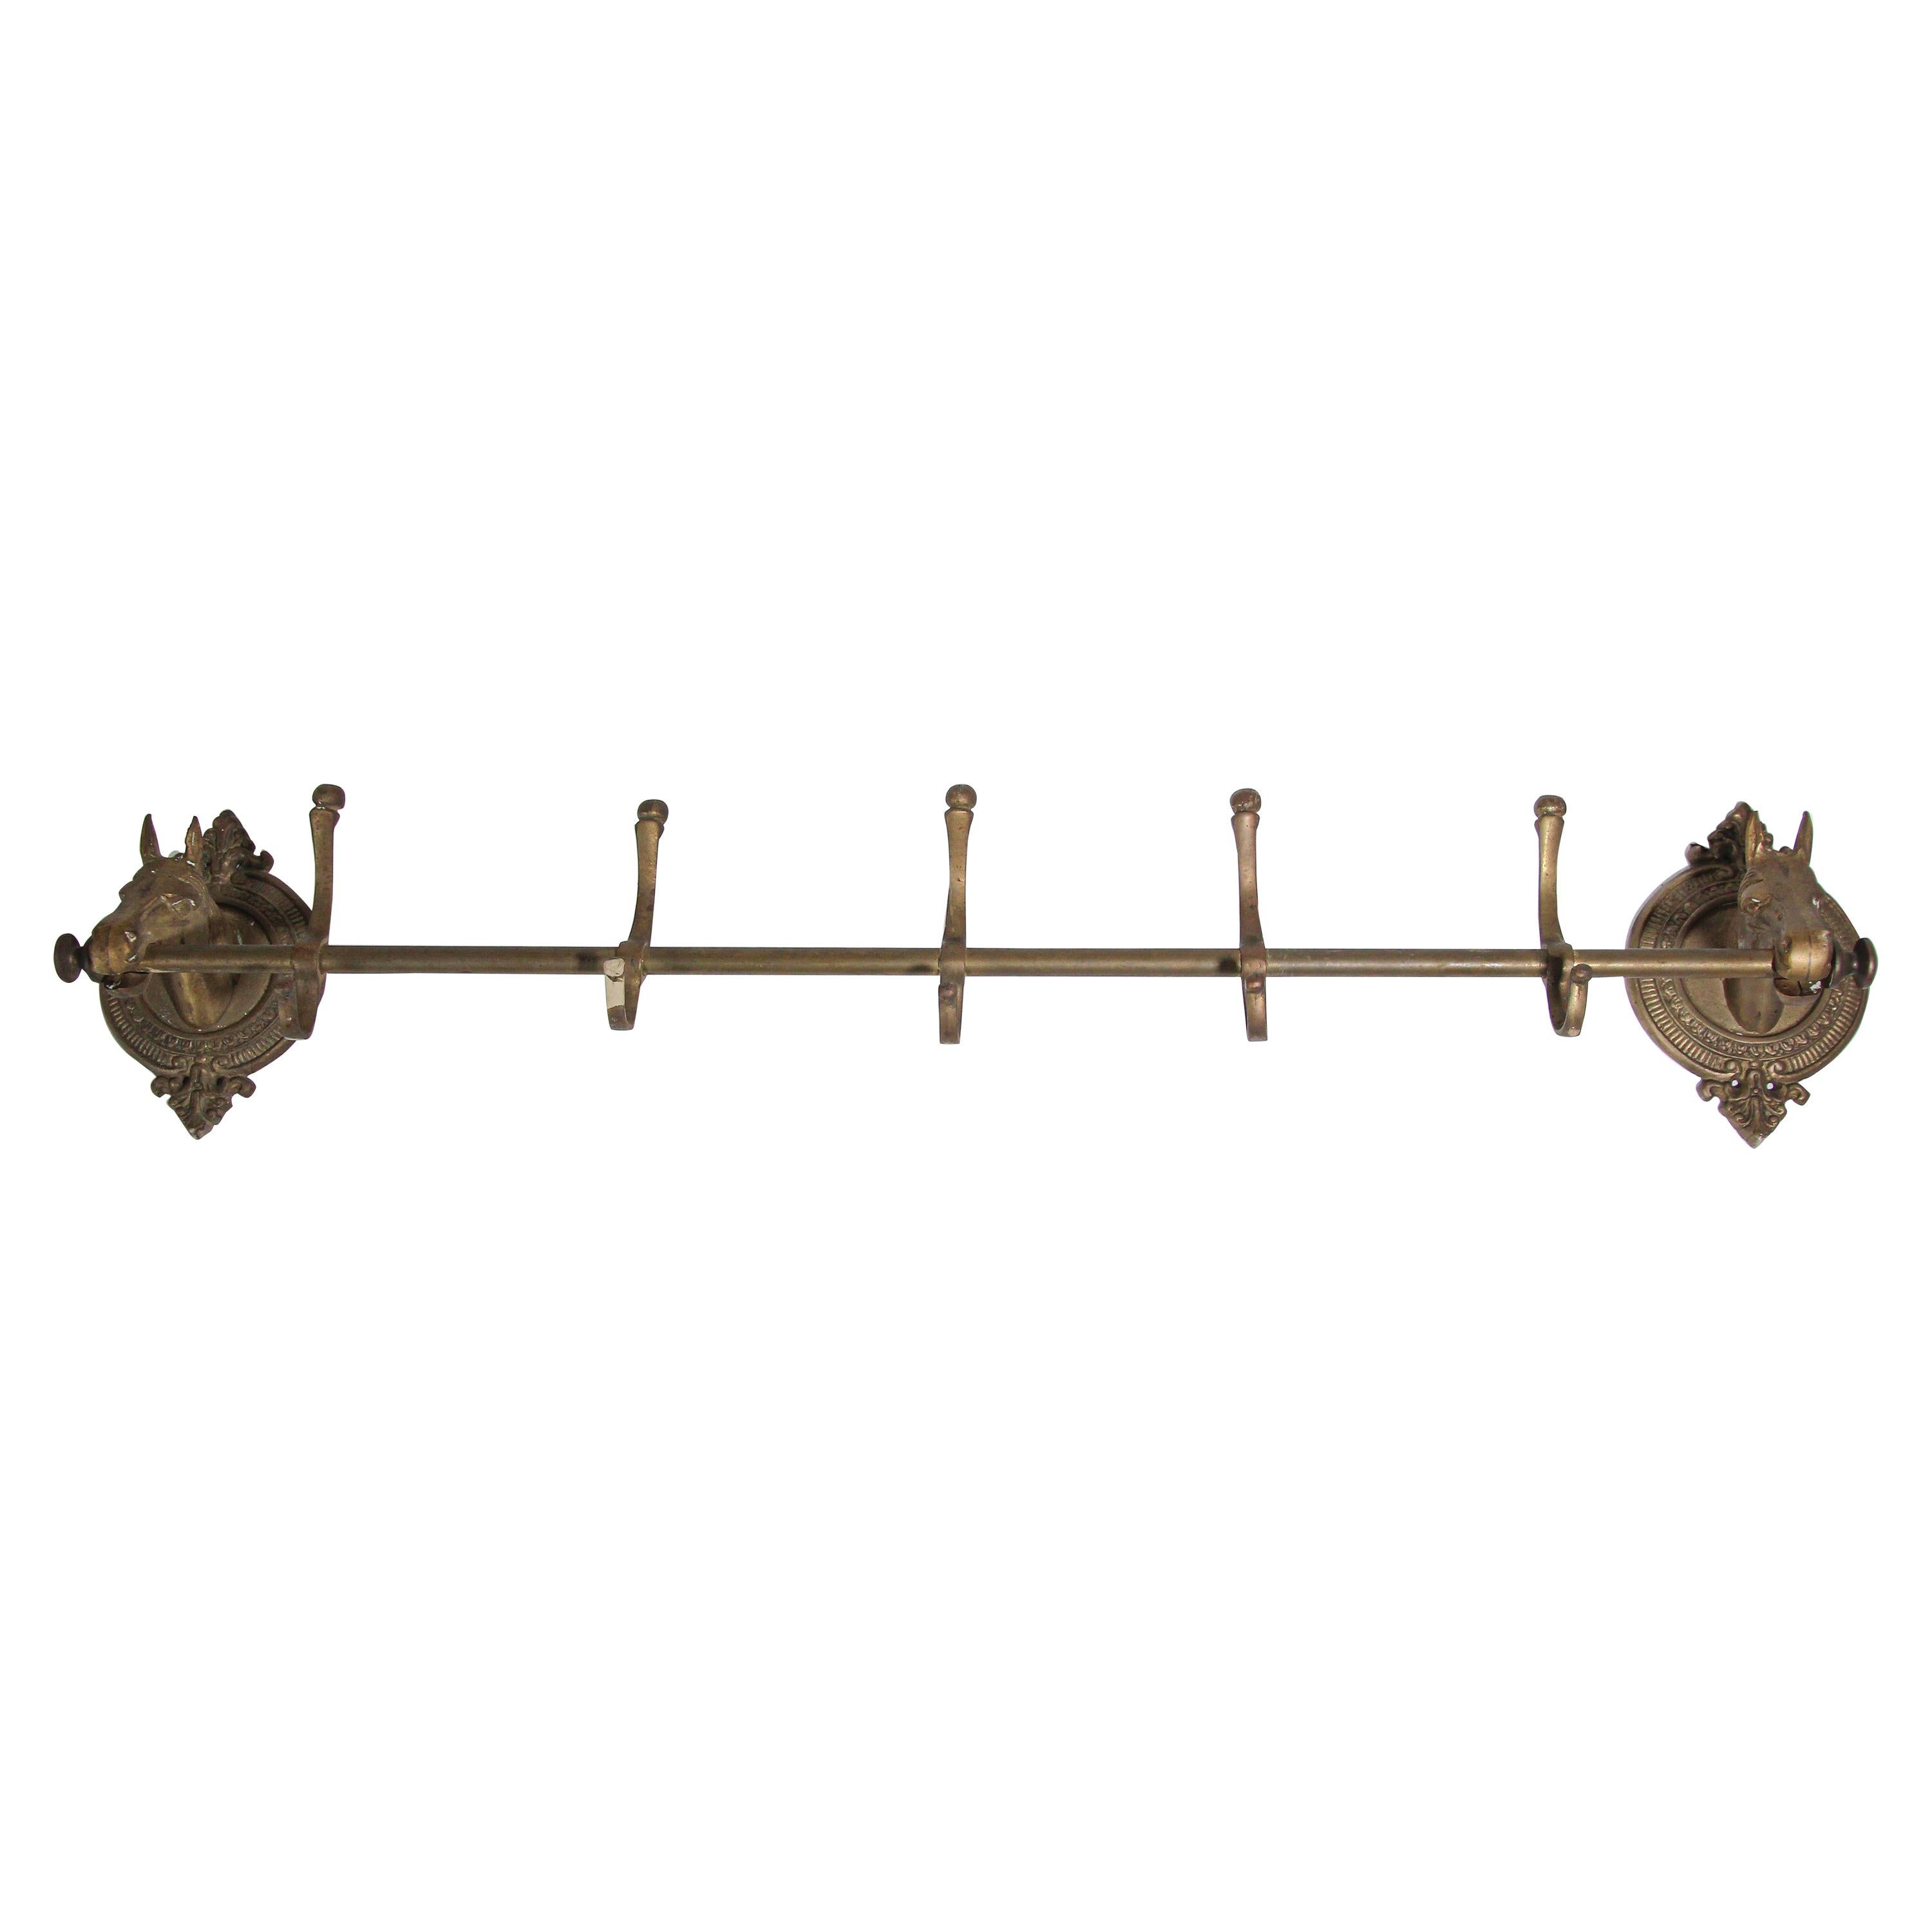 Details about   A Vintage style Awesome Brass made Unique BAT Designed coat hook from India 